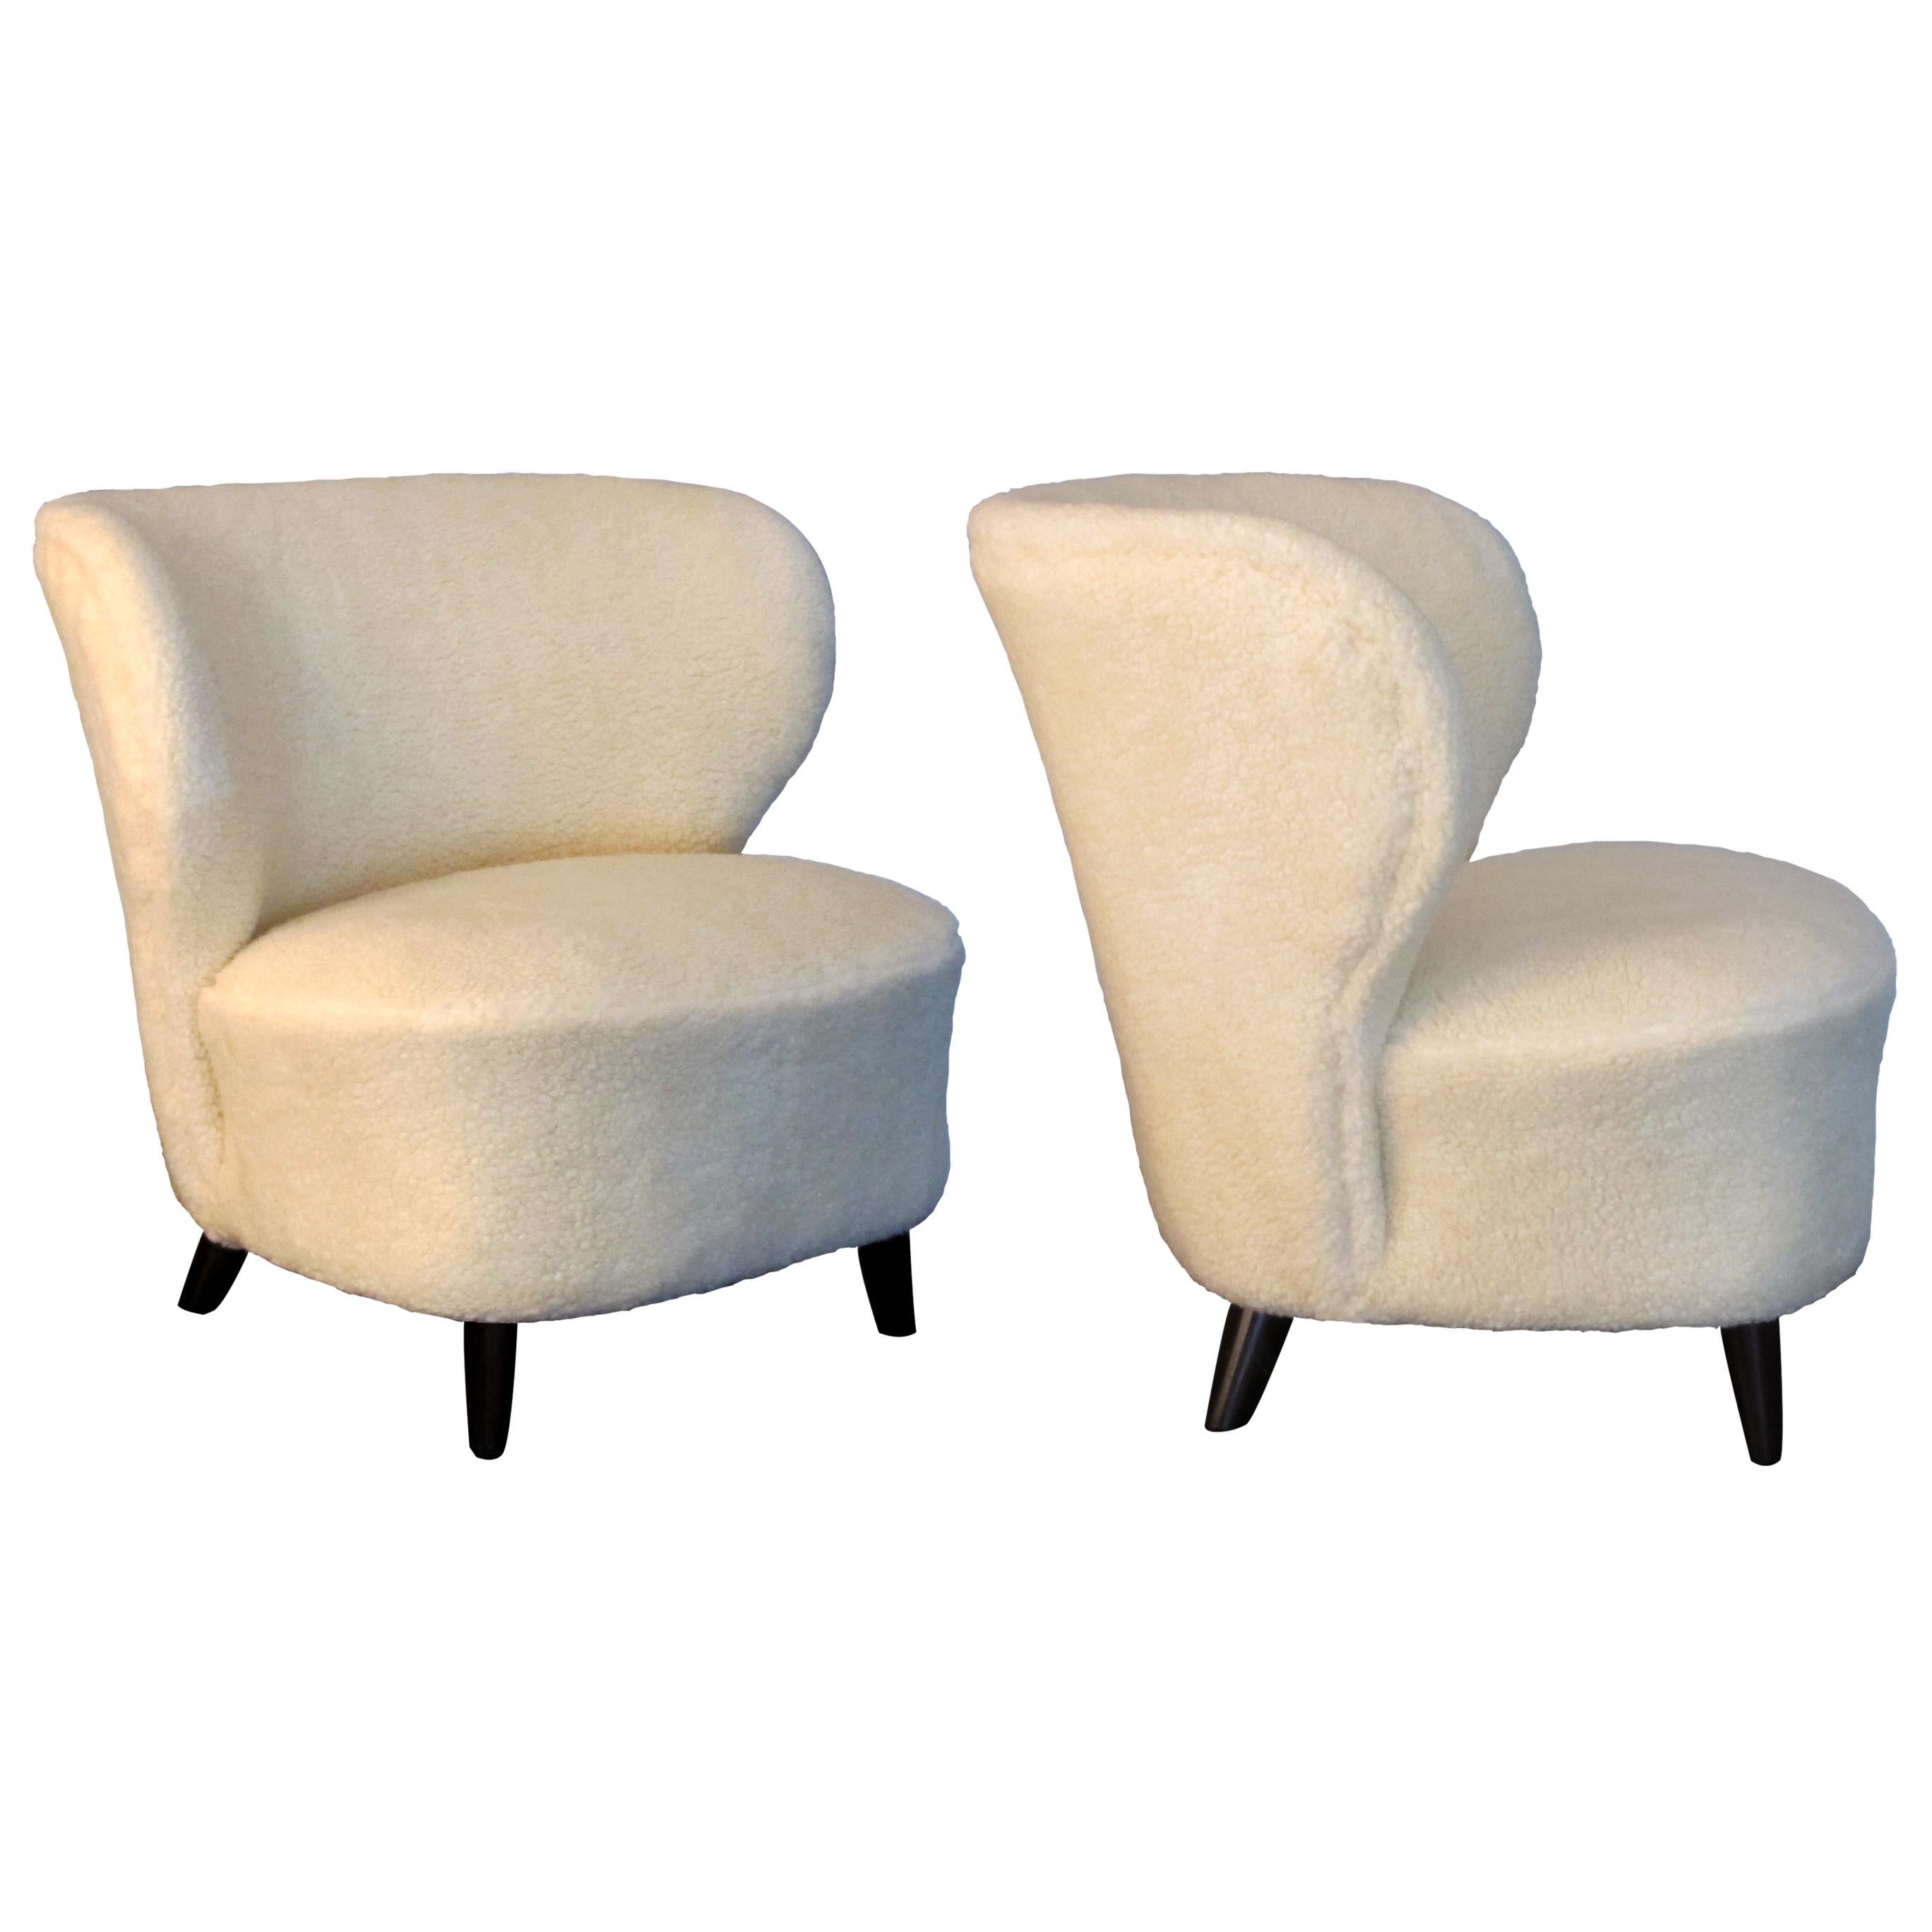 Art Deco Pair of 1940s Finnish Curved Wingback Lounge Armchairs in Soft Lambskin Fabric